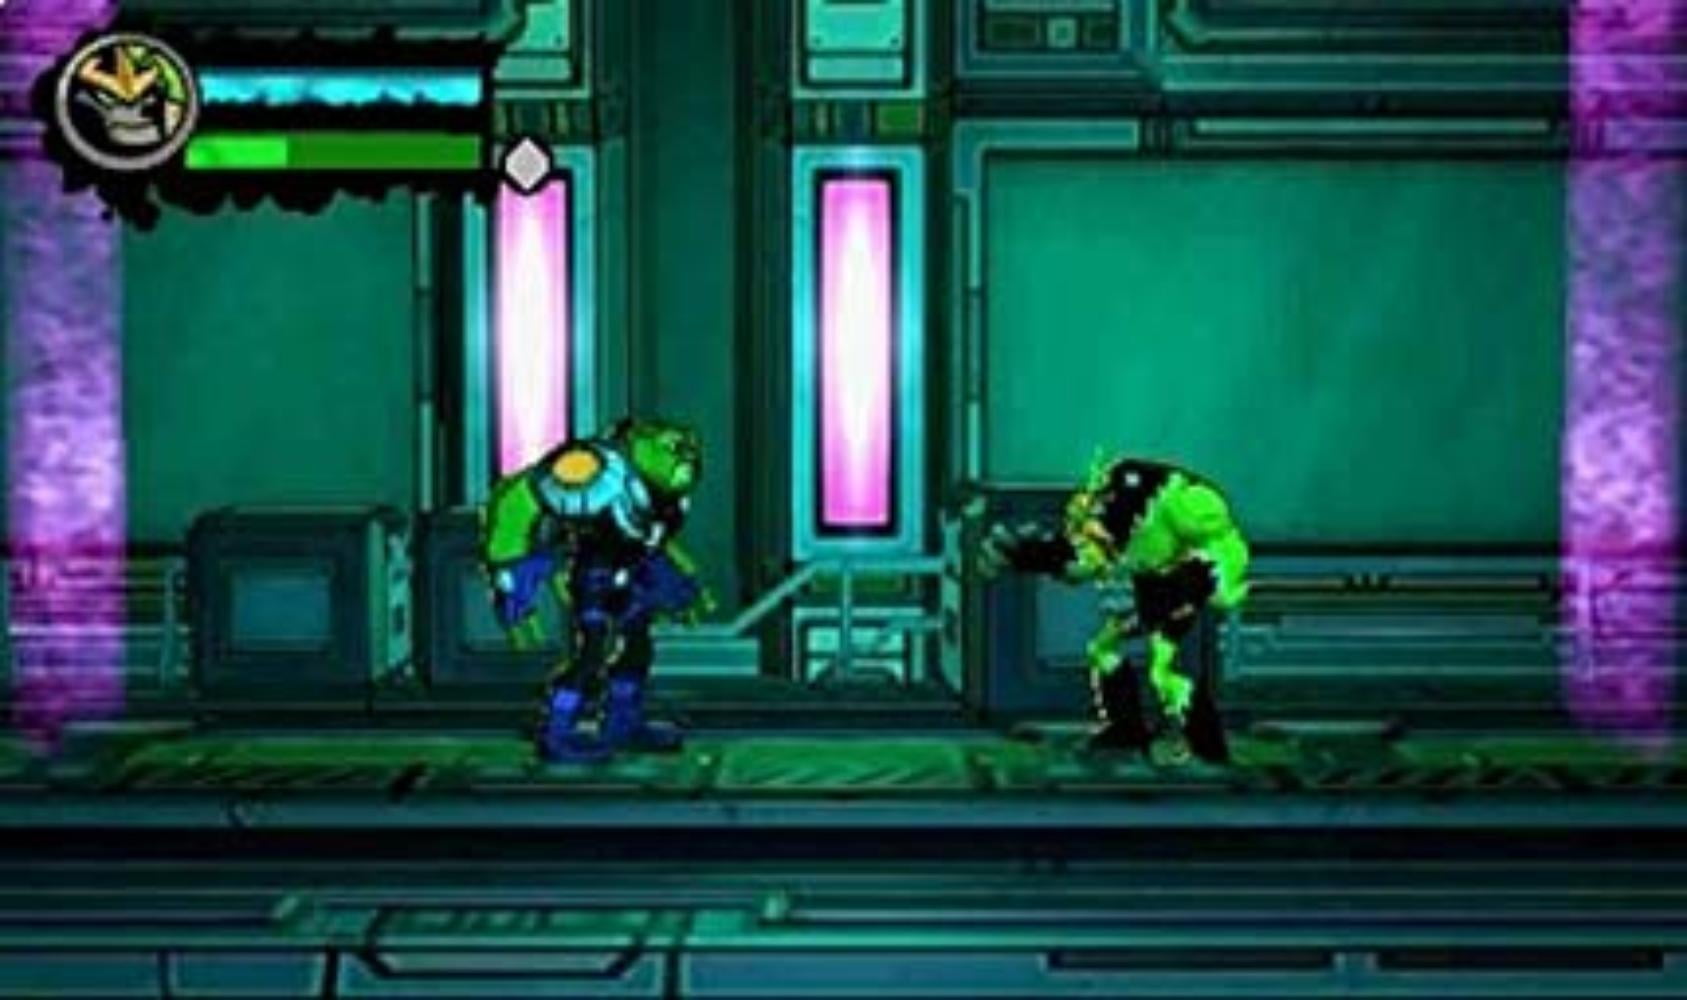 Ben 10 Omniverse 2 - Nintendo 3DS, Play as favorite characters from the show including Ben, Rook and Omnitrix aliens in the multiplayer brawler mode By by D3 Publisher Walmart.com